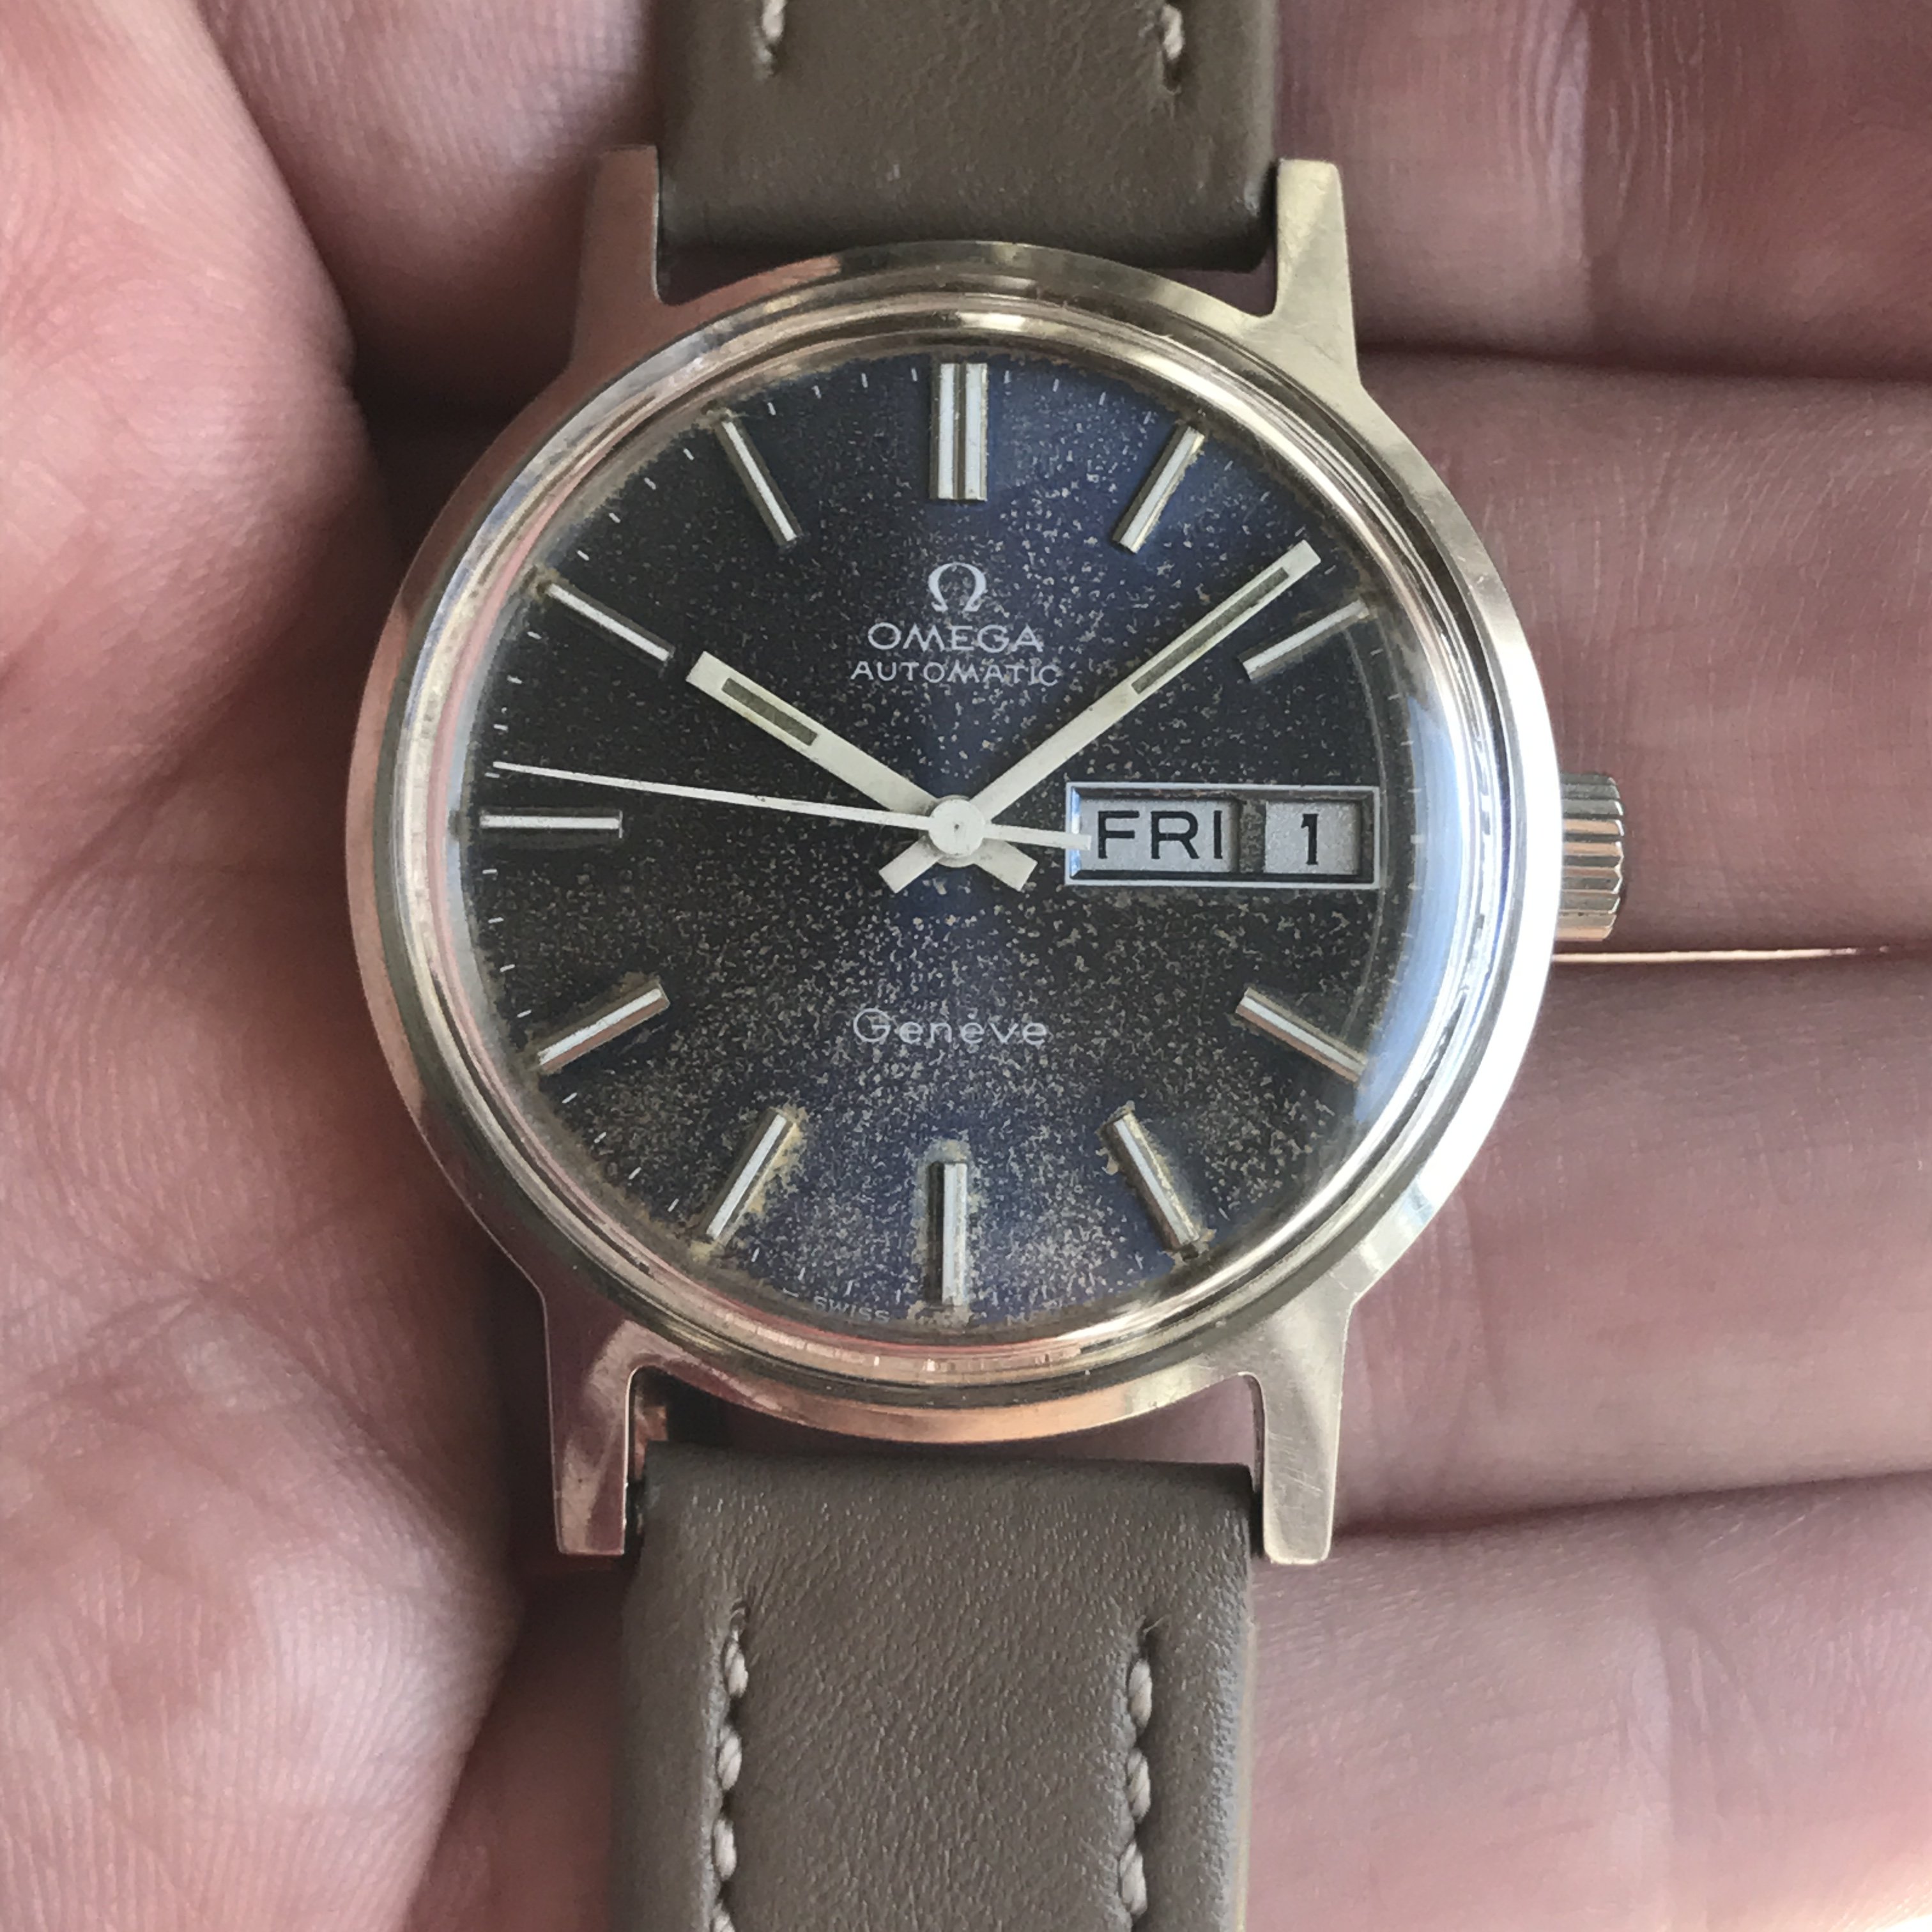 ref 166.0117, stardust dial | Omega Forums